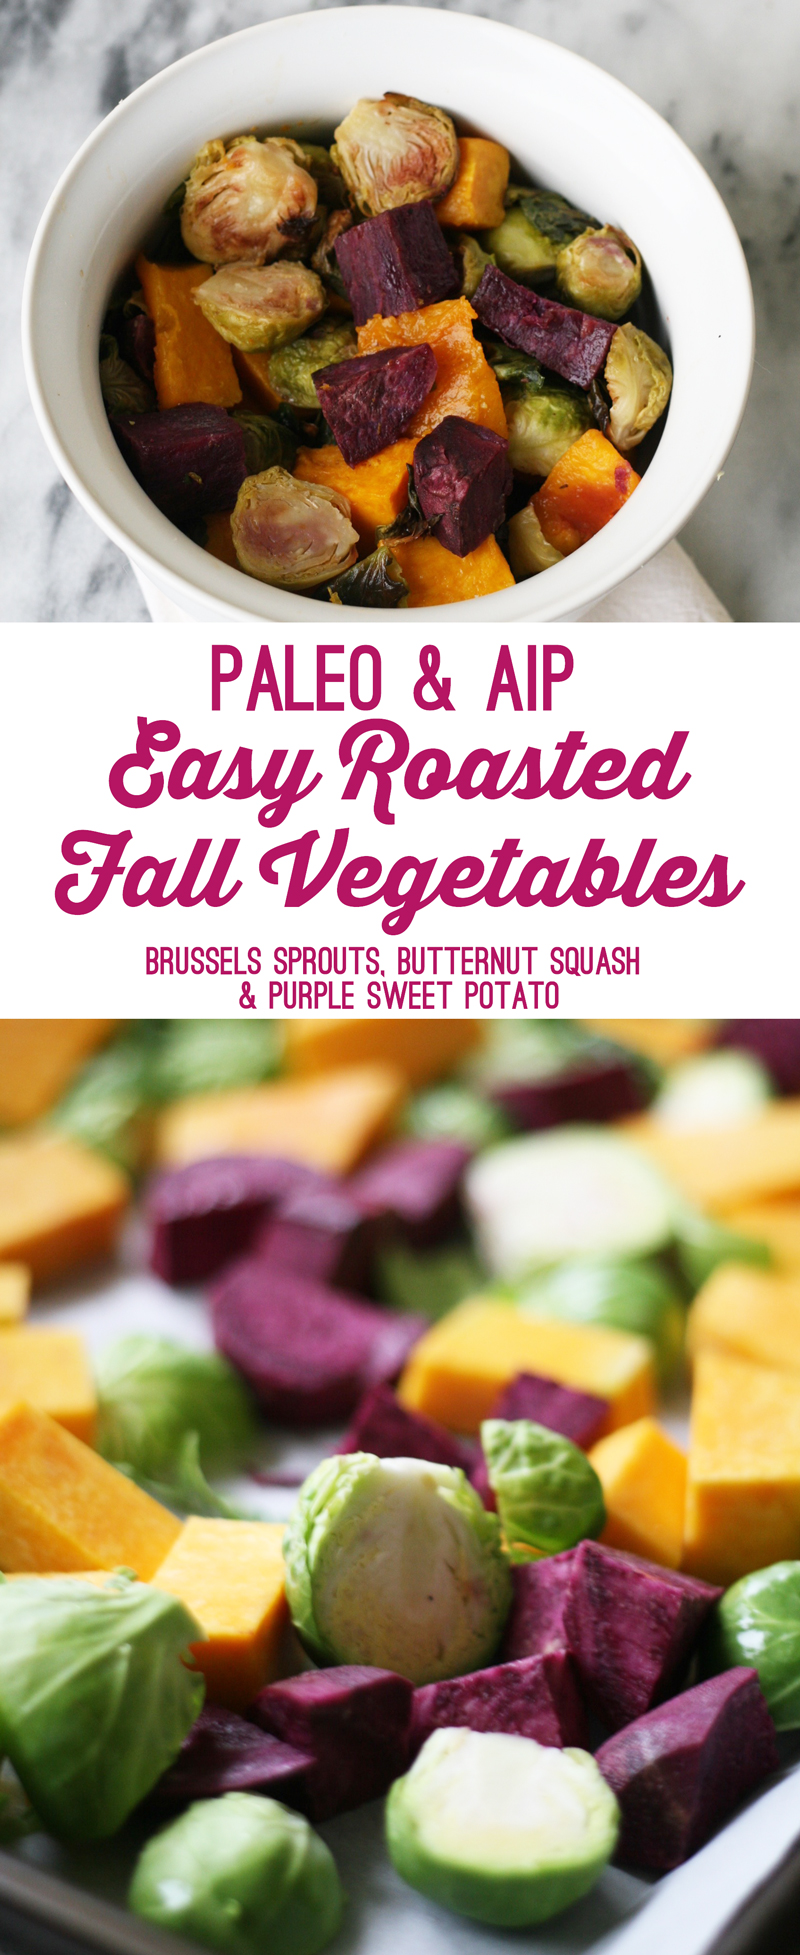 Easy Roasted Fall Vegetables (AIP, Paleo)